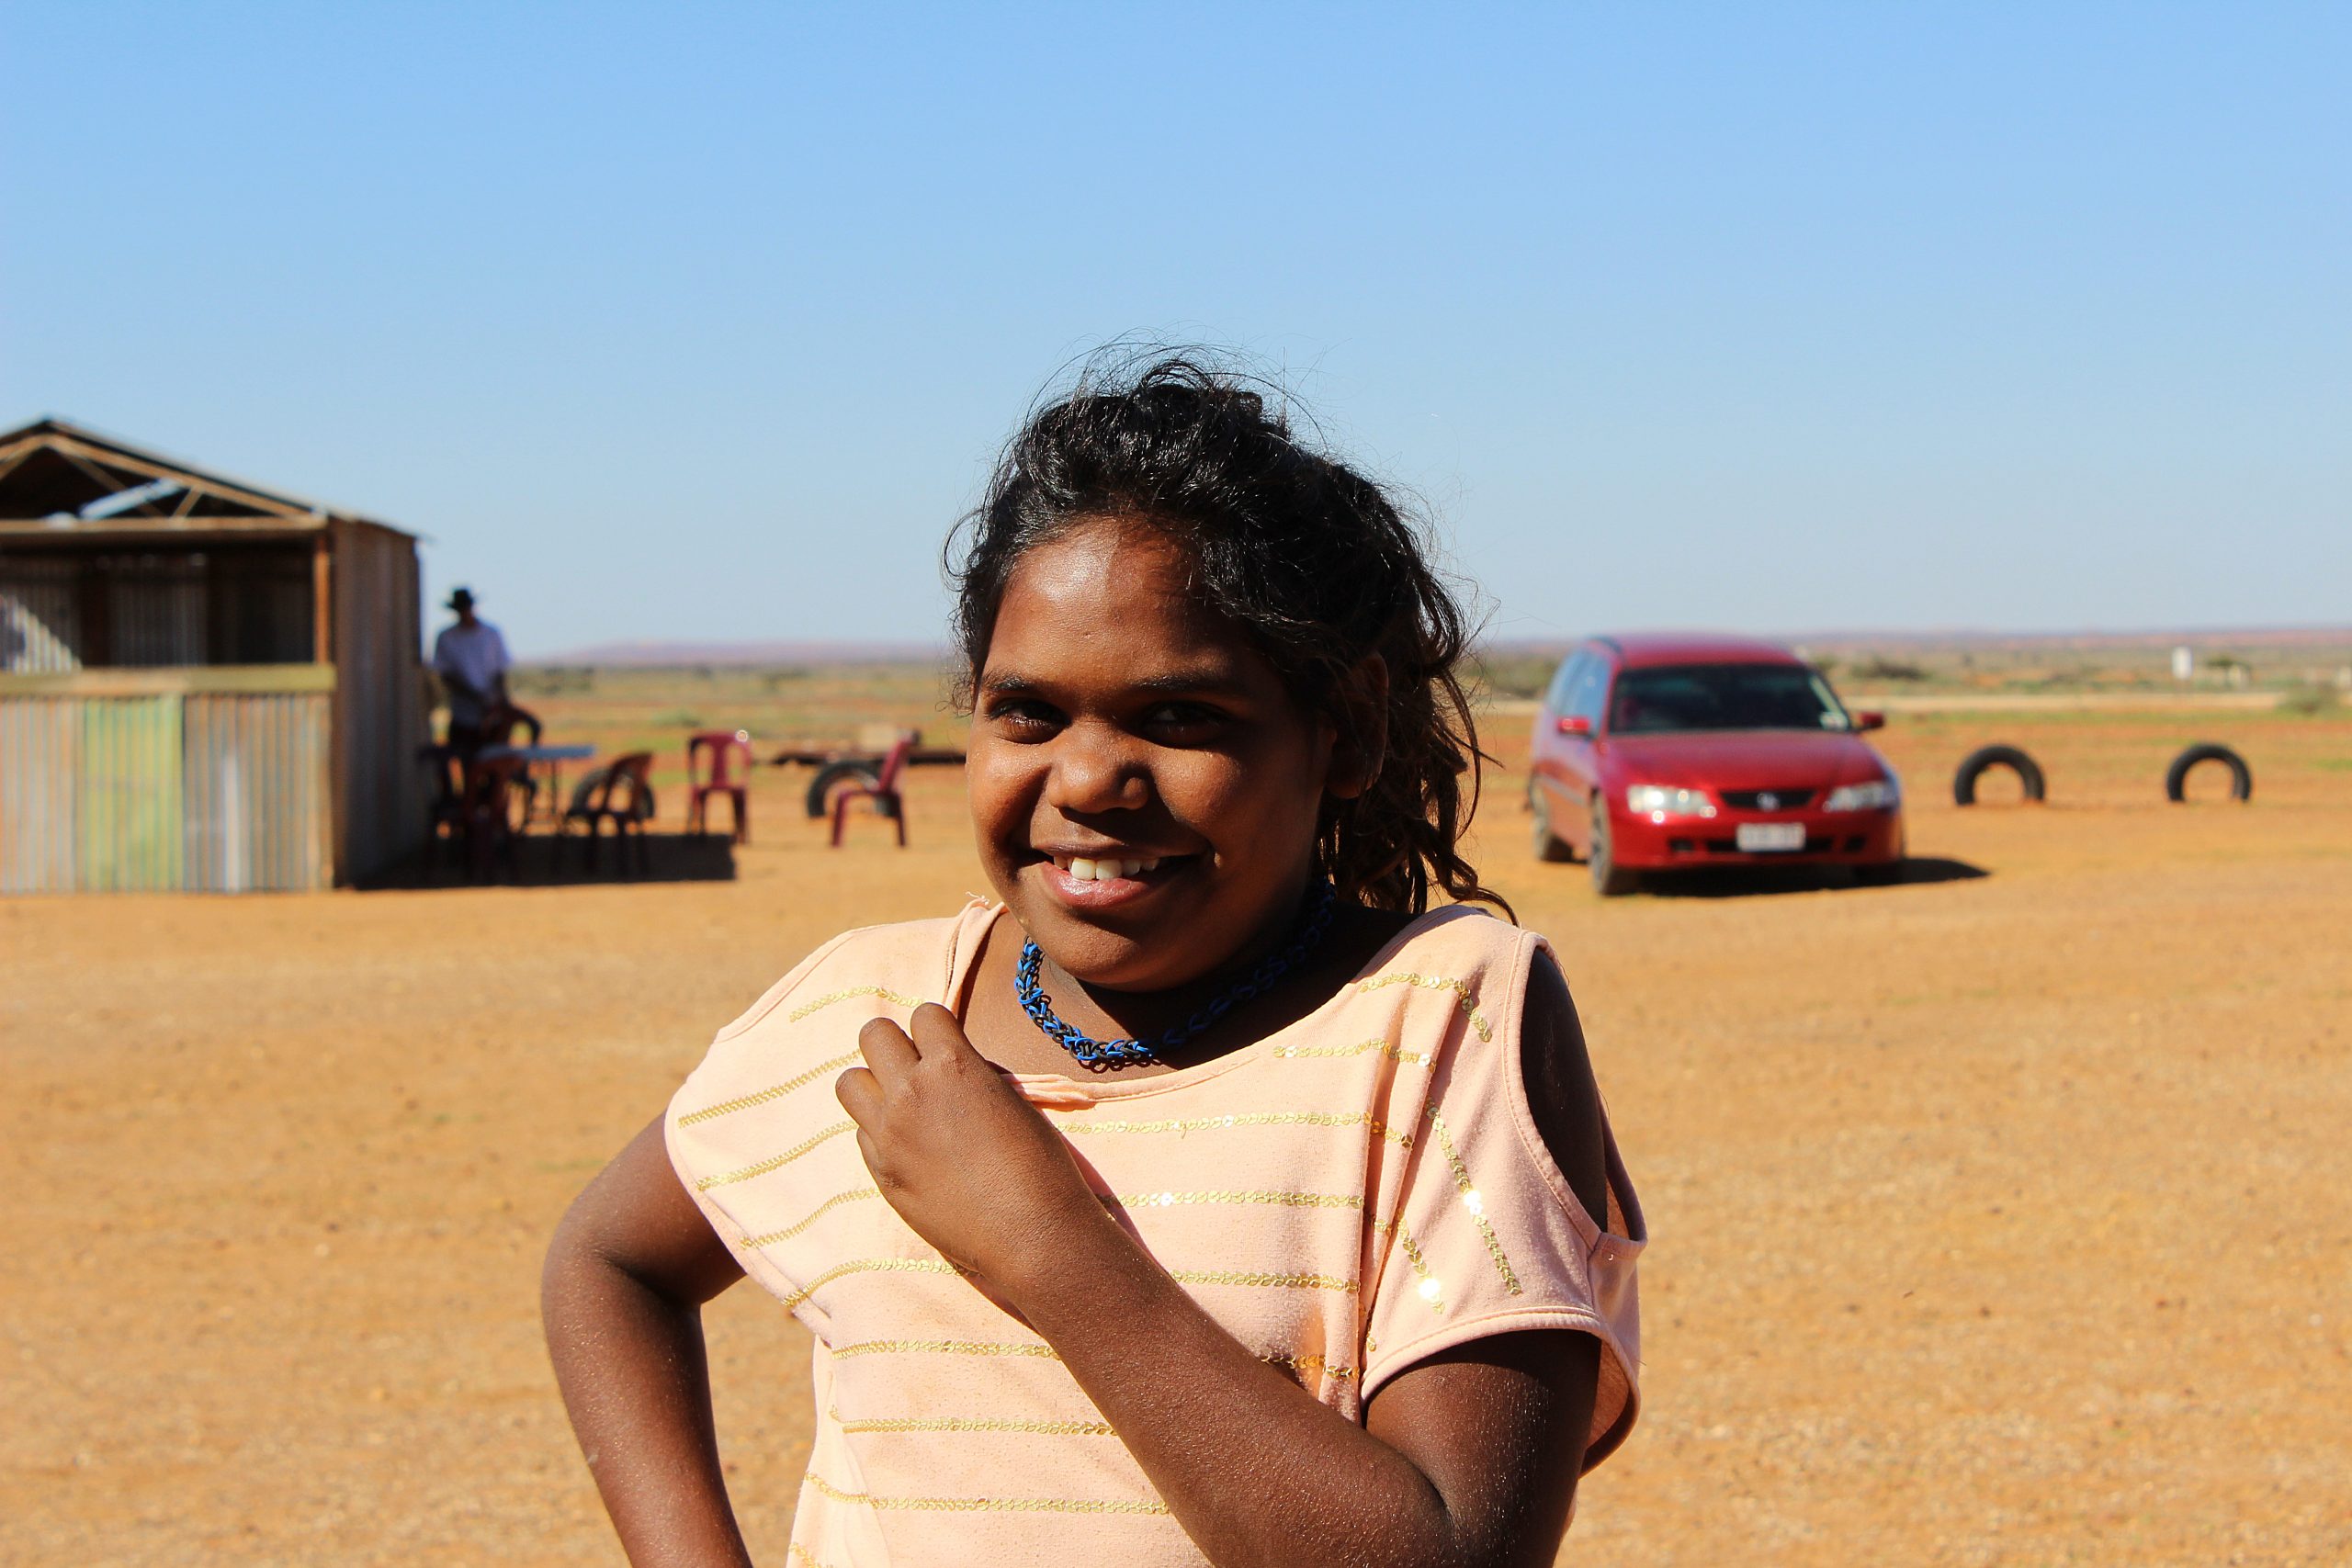 Christmas in Oodnadatta – We are all in this together